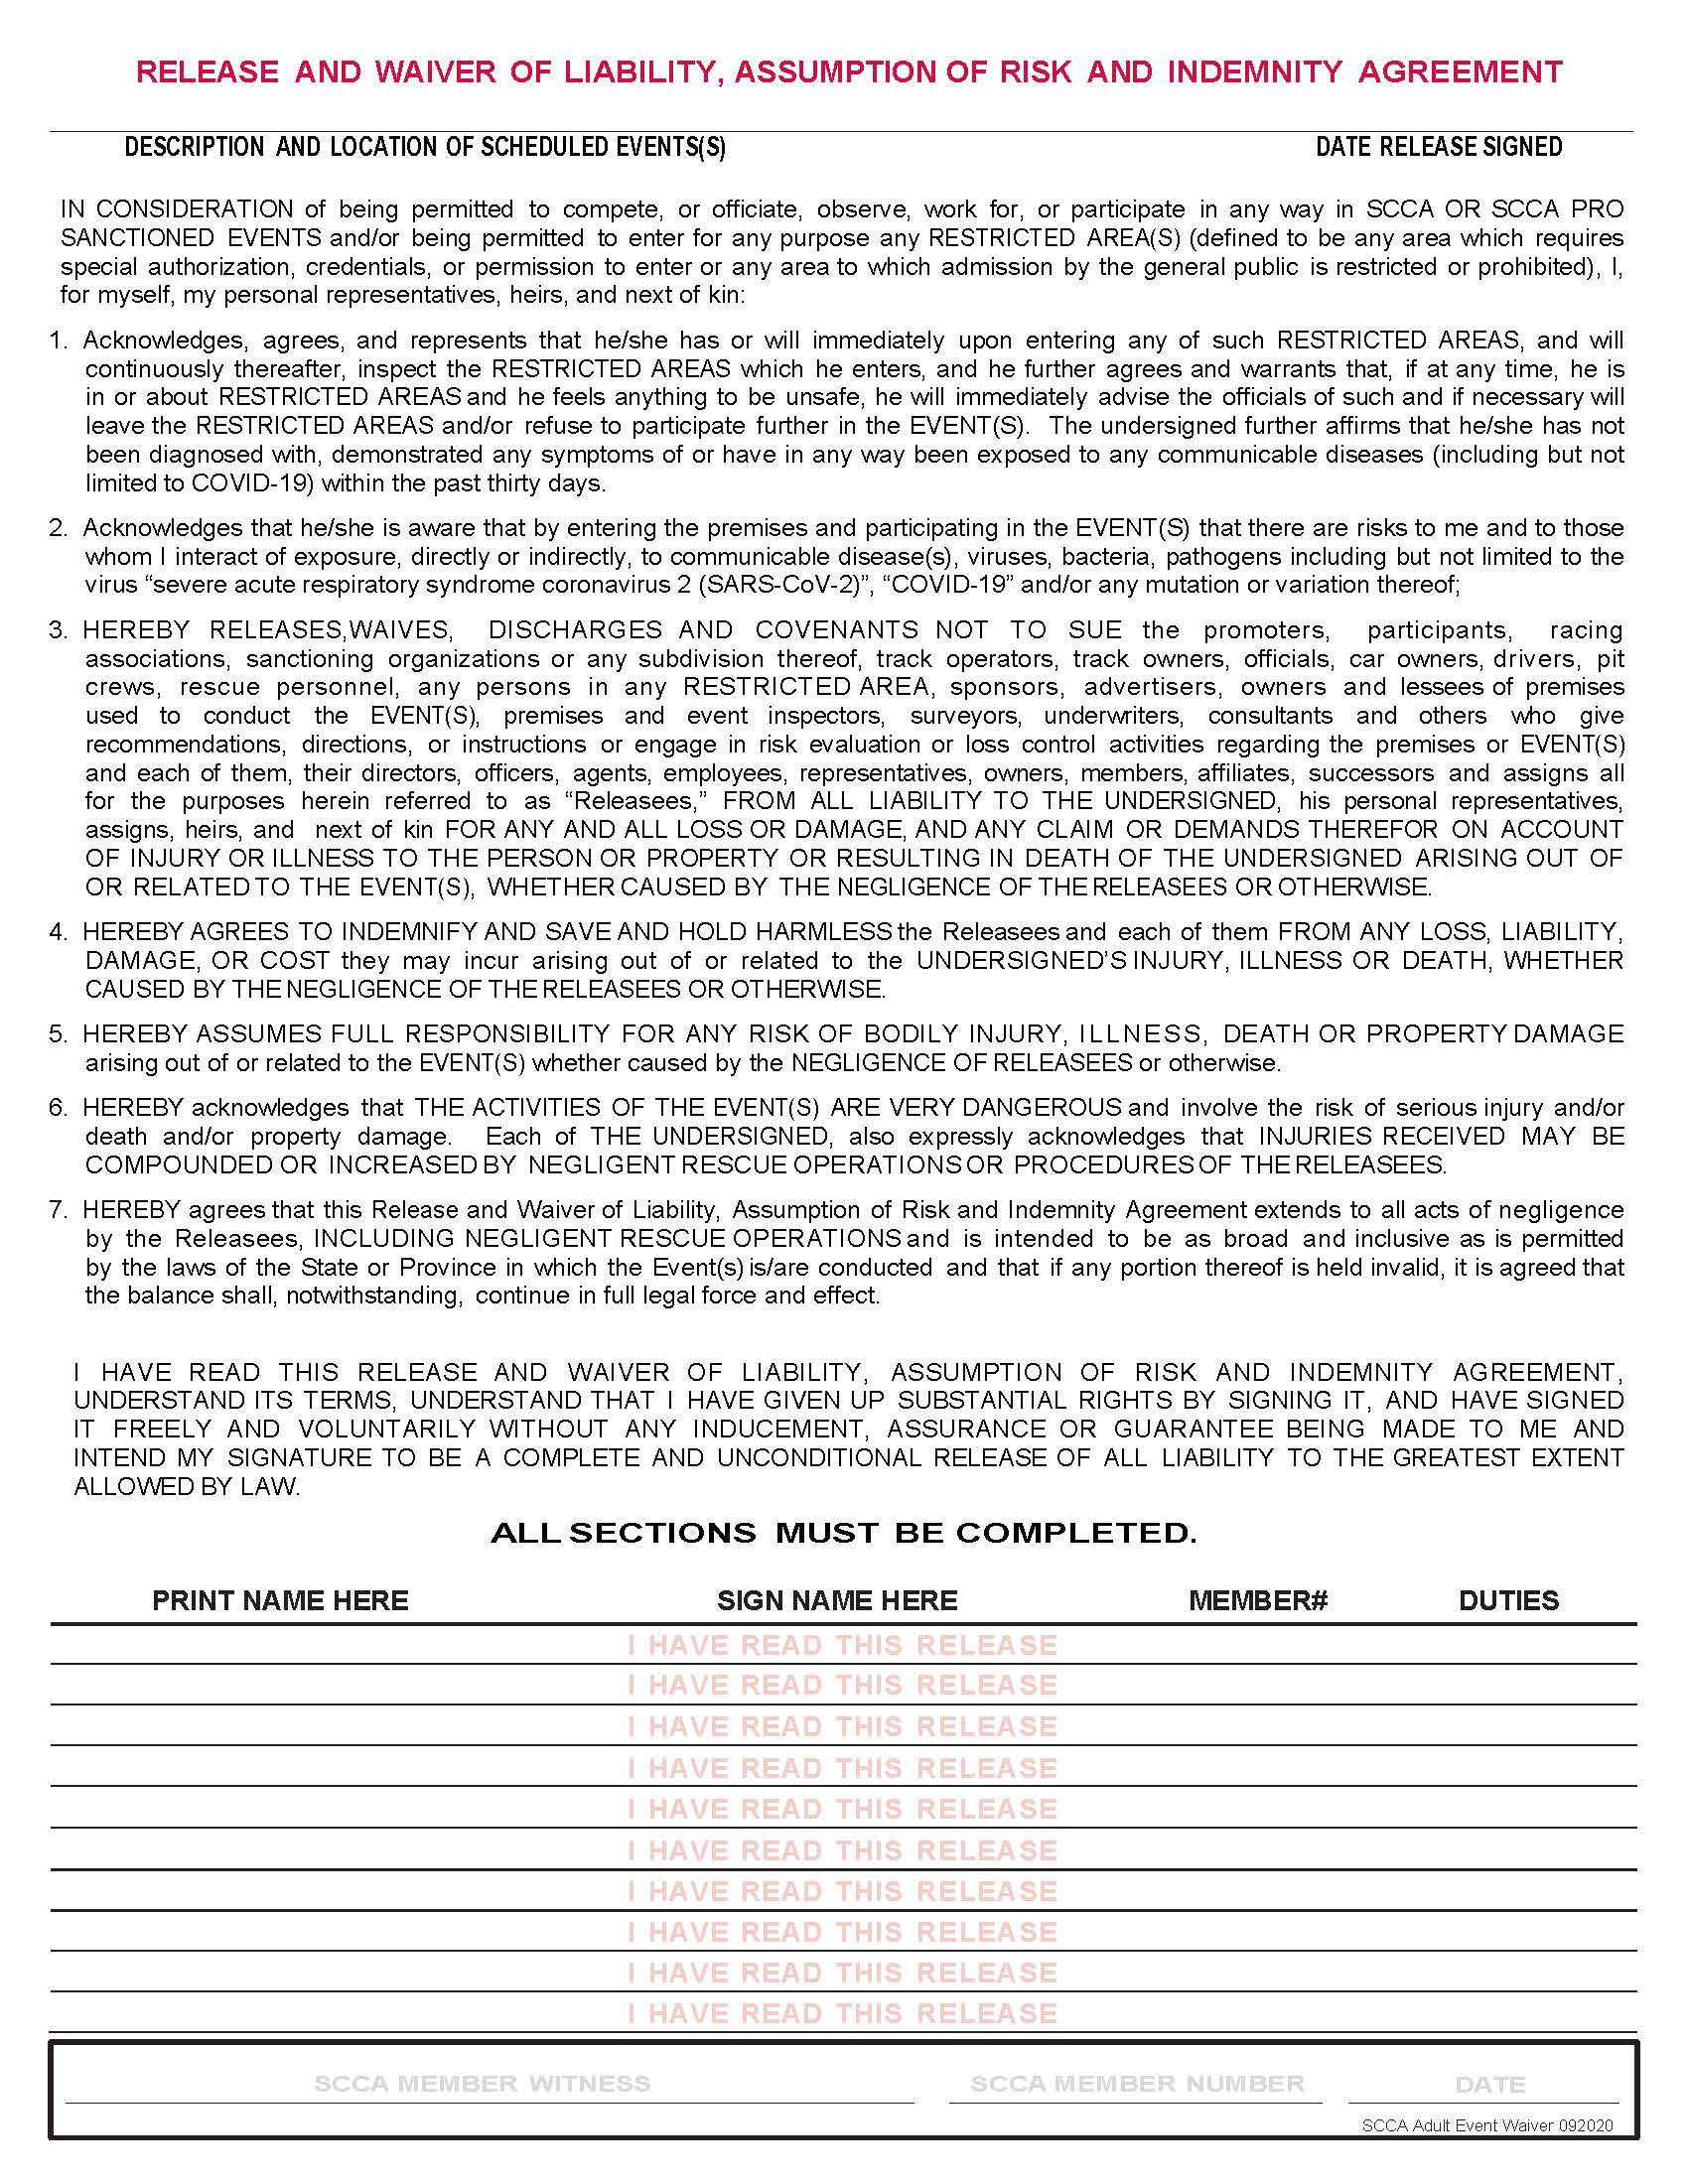 9716.1 Adult Event Waiver Liability for 1155 ($5 per 100)